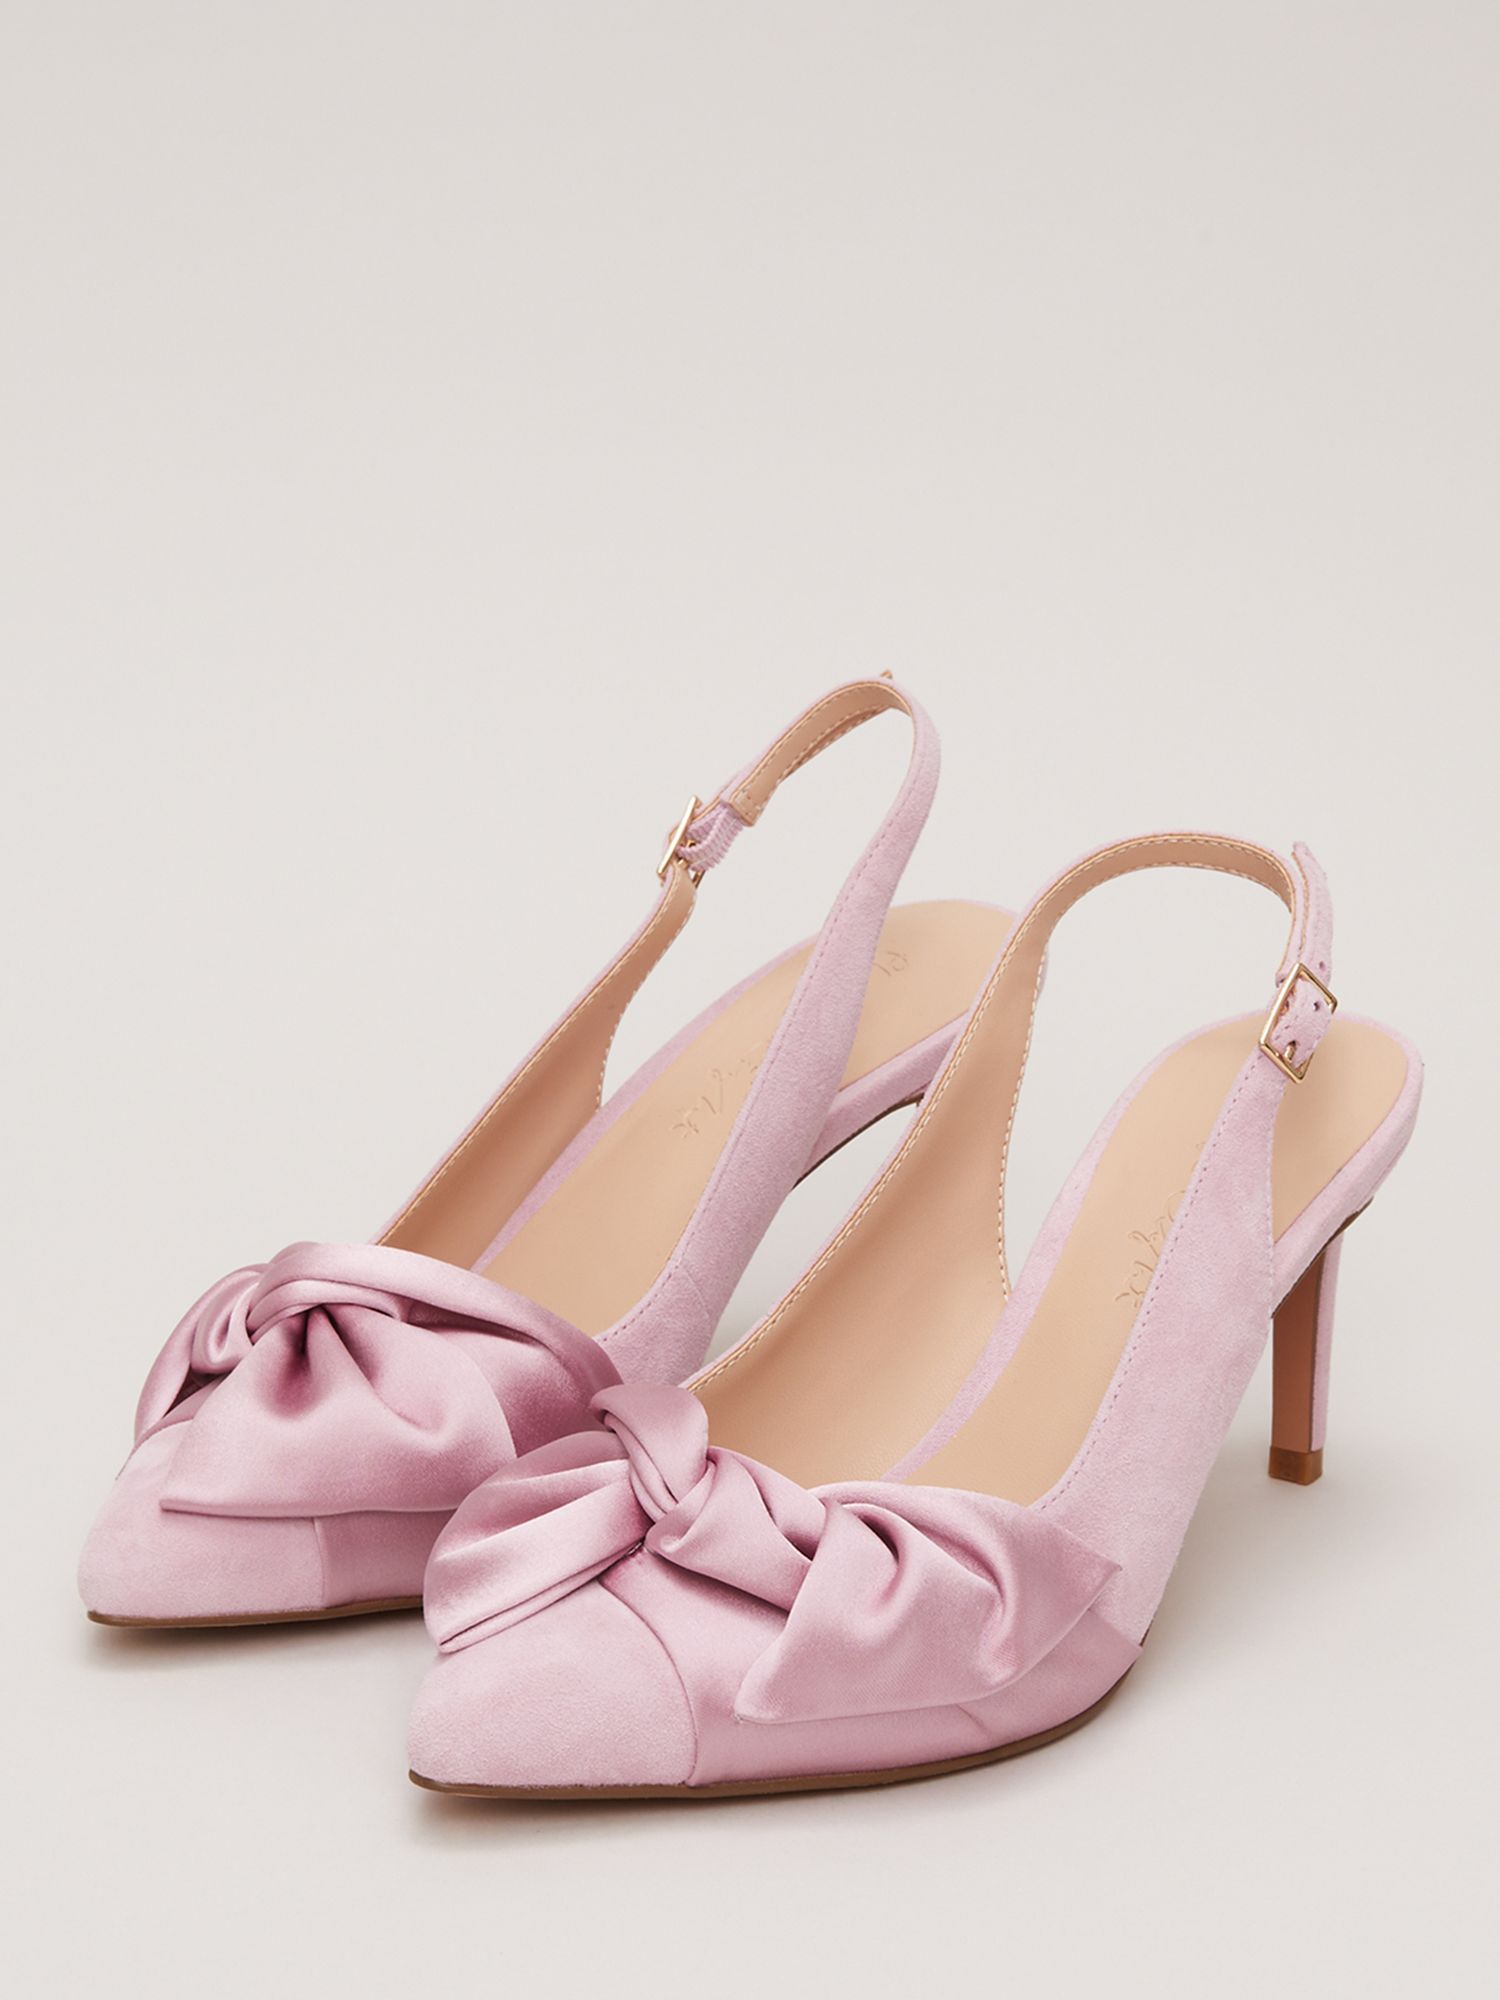 Buy Phase Eight Twist Front Pointed Toe Shoes Online at johnlewis.com